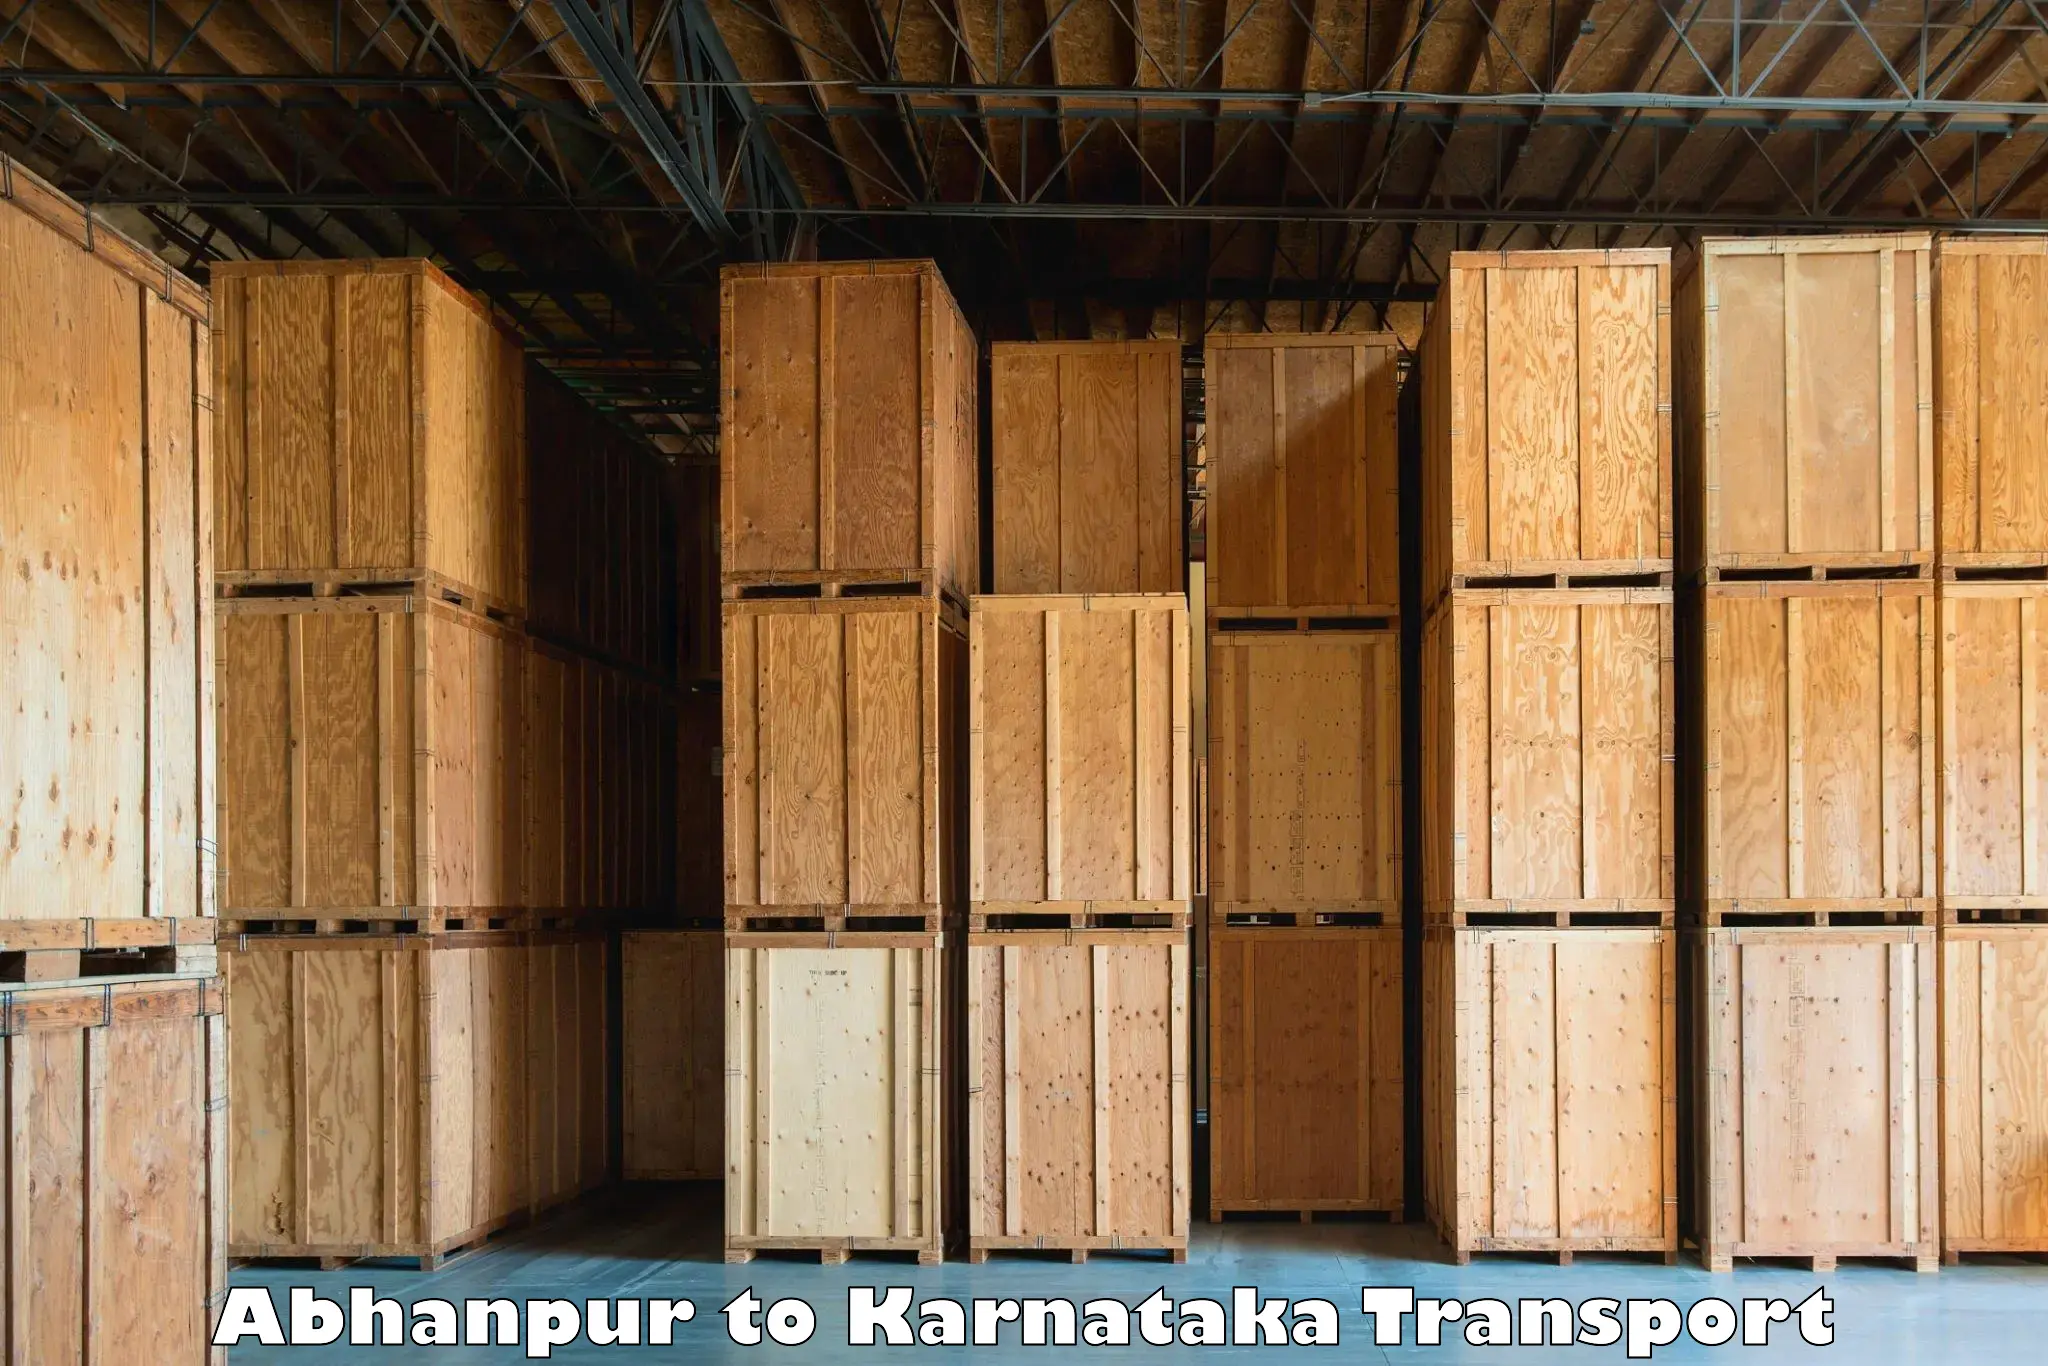 Daily parcel service transport Abhanpur to Bagalkot